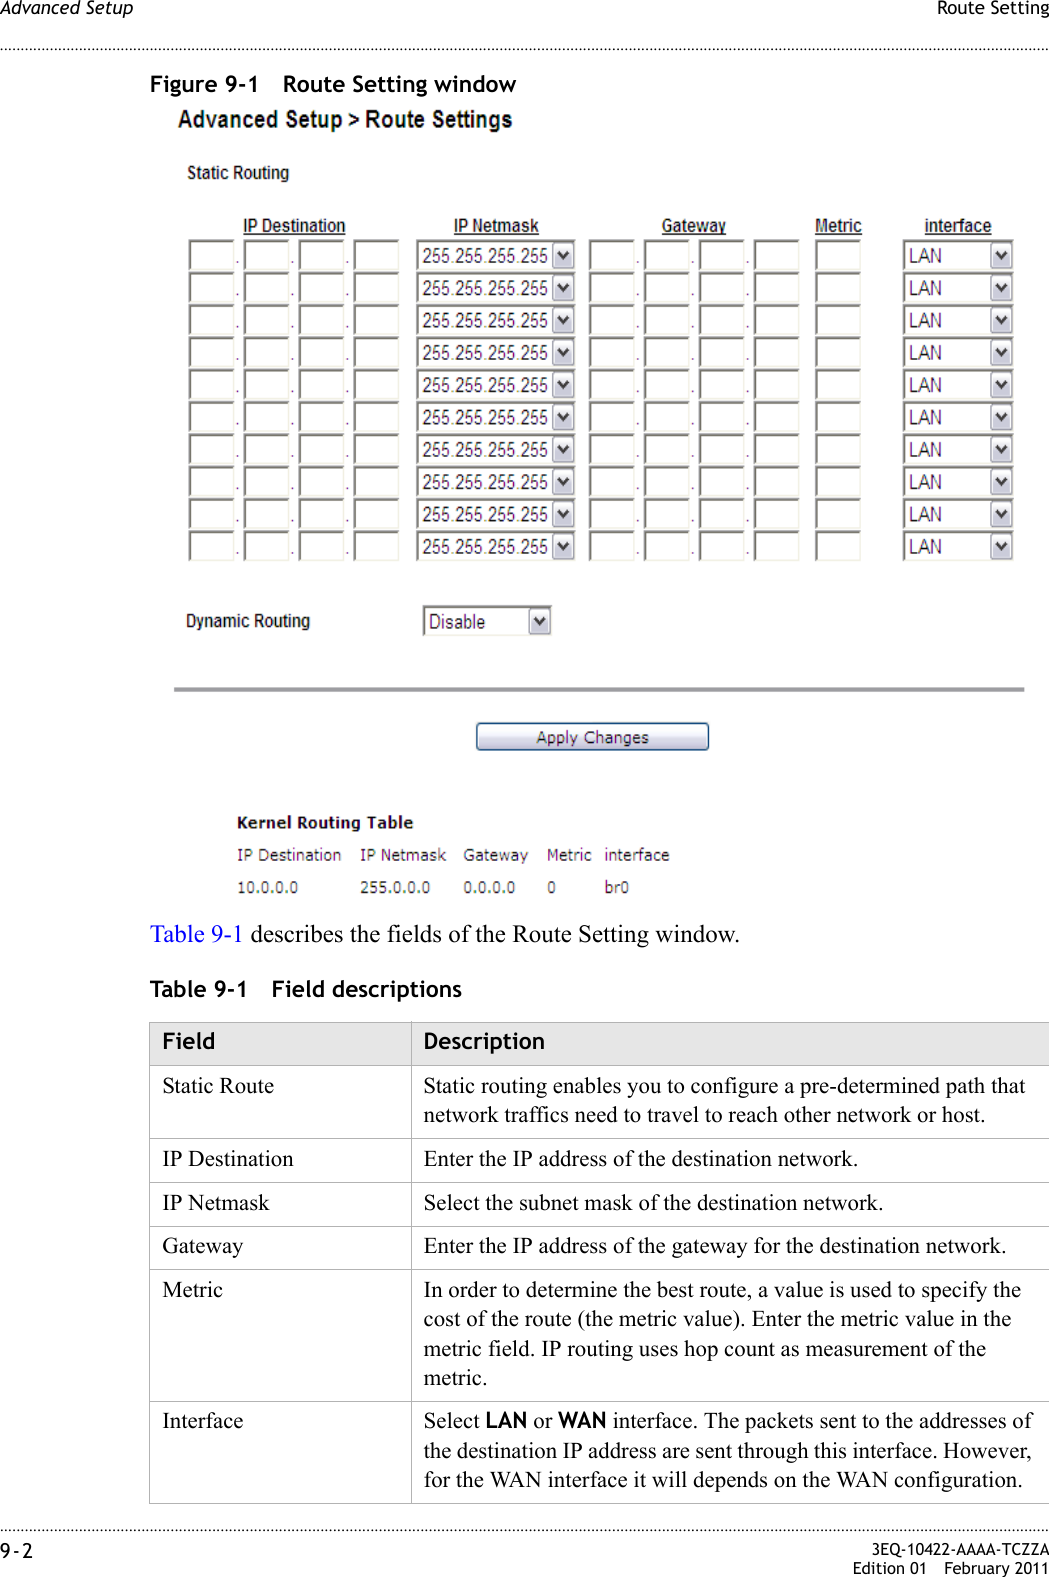 ............................................................................................................................................................................................................................................................Route SettingAdvanced Setup9-2  3EQ-10422-AAAA-TCZZAEdition 01 February 2011............................................................................................................................................................................................................................................................Figure 9-1 Route Setting windowTable 9-1 describes the fields of the Route Setting window.Table 9-1 Field descriptionsField DescriptionStatic Route  Static routing enables you to configure a pre-determined path that network traffics need to travel to reach other network or host.IP Destination Enter the IP address of the destination network.IP Netmask Select the subnet mask of the destination network.Gateway Enter the IP address of the gateway for the destination network.Metric In order to determine the best route, a value is used to specify the cost of the route (the metric value). Enter the metric value in the metric field. IP routing uses hop count as measurement of the metric.Interface Select LAN or WAN interface. The packets sent to the addresses of the destination IP address are sent through this interface. However, for the WAN interface it will depends on the WAN configuration.